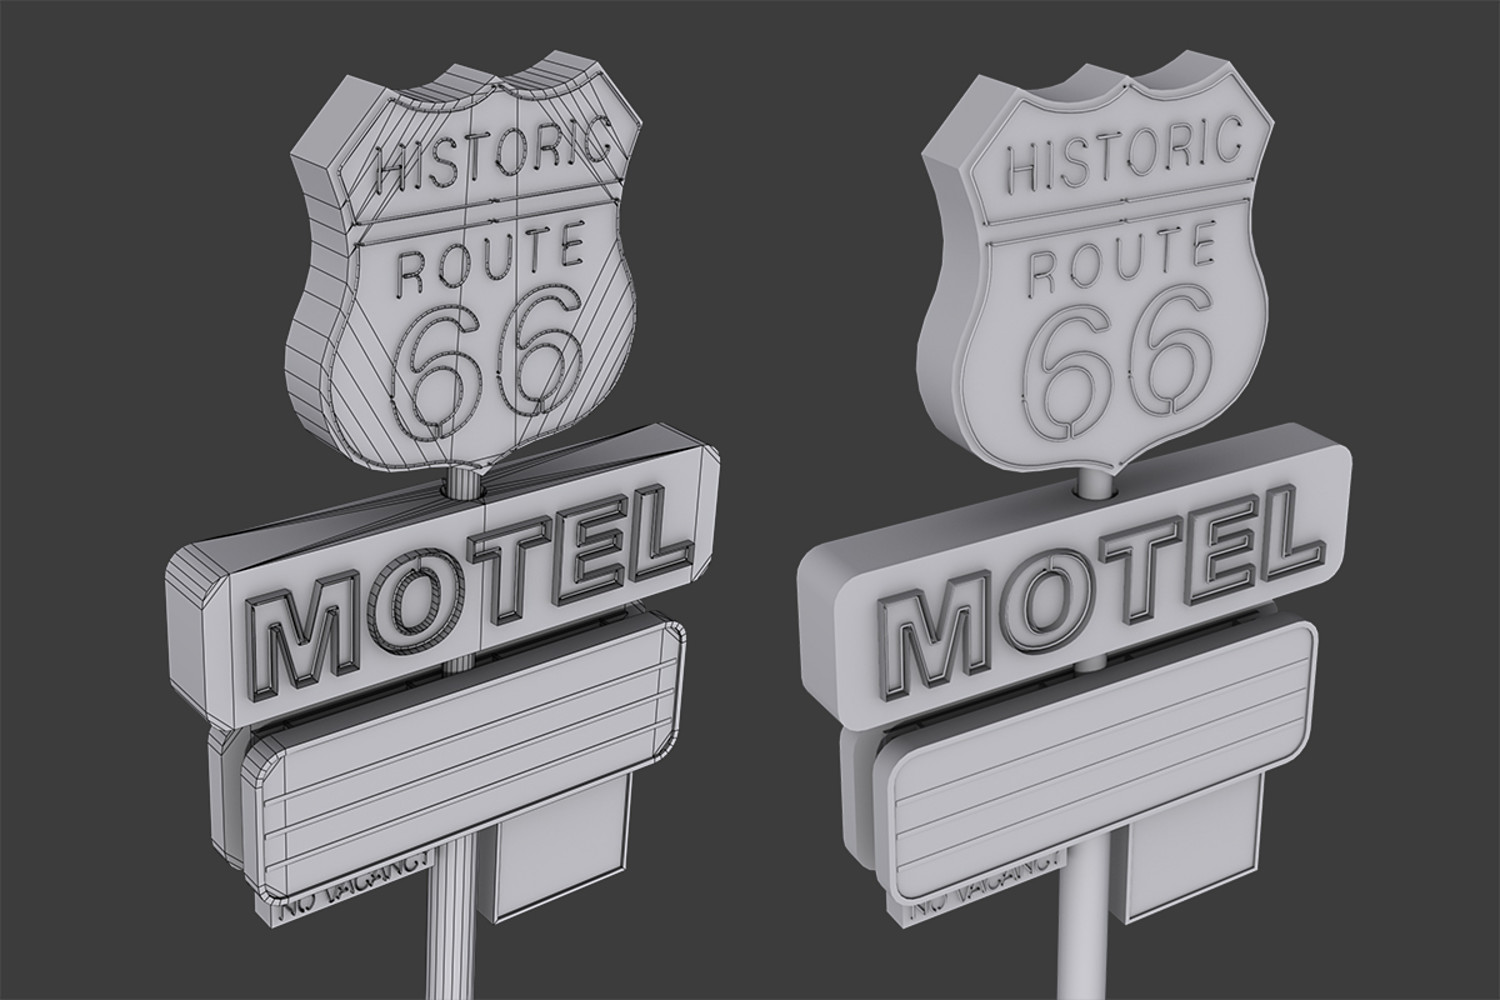 Historic Route 66 Motel Sign